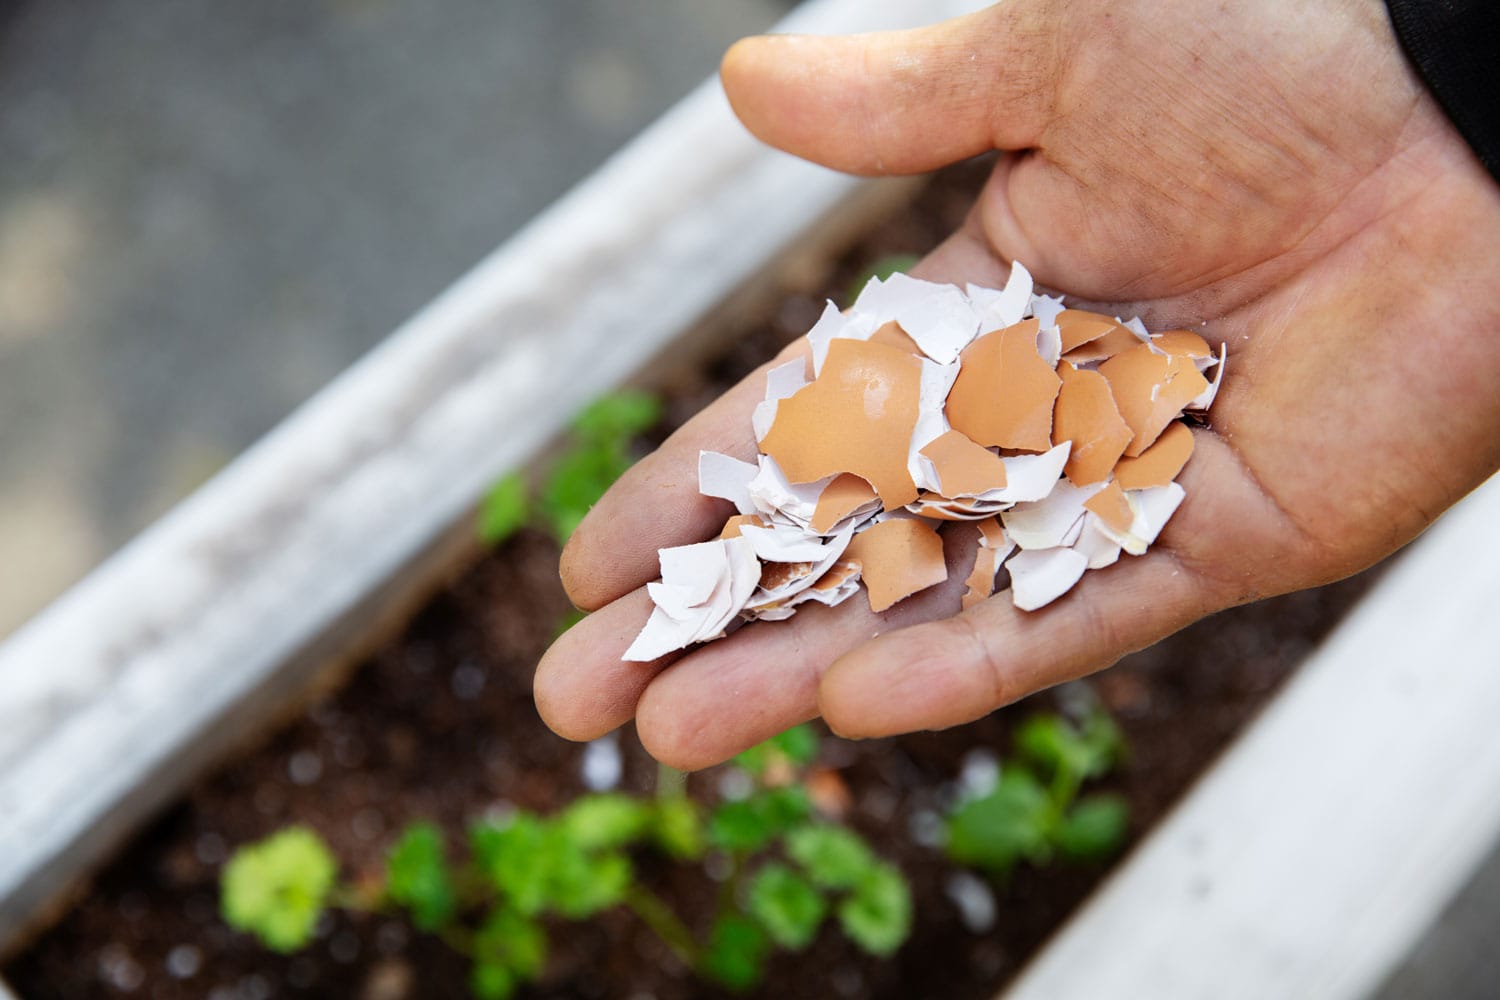 A hand with broken egg shells and garden in background.